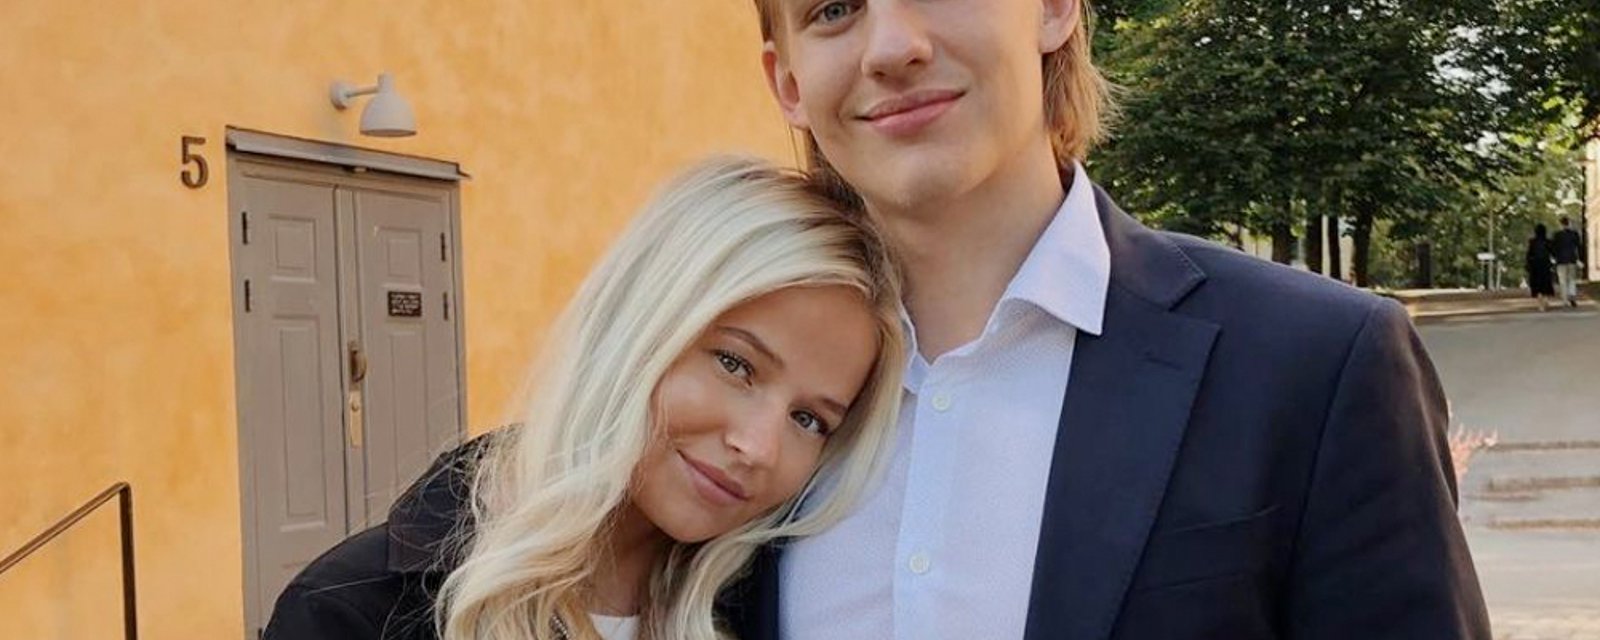 Cancer free Oskar Lindblom credits girlfriend with forcing him to visit doctor for diagnosis